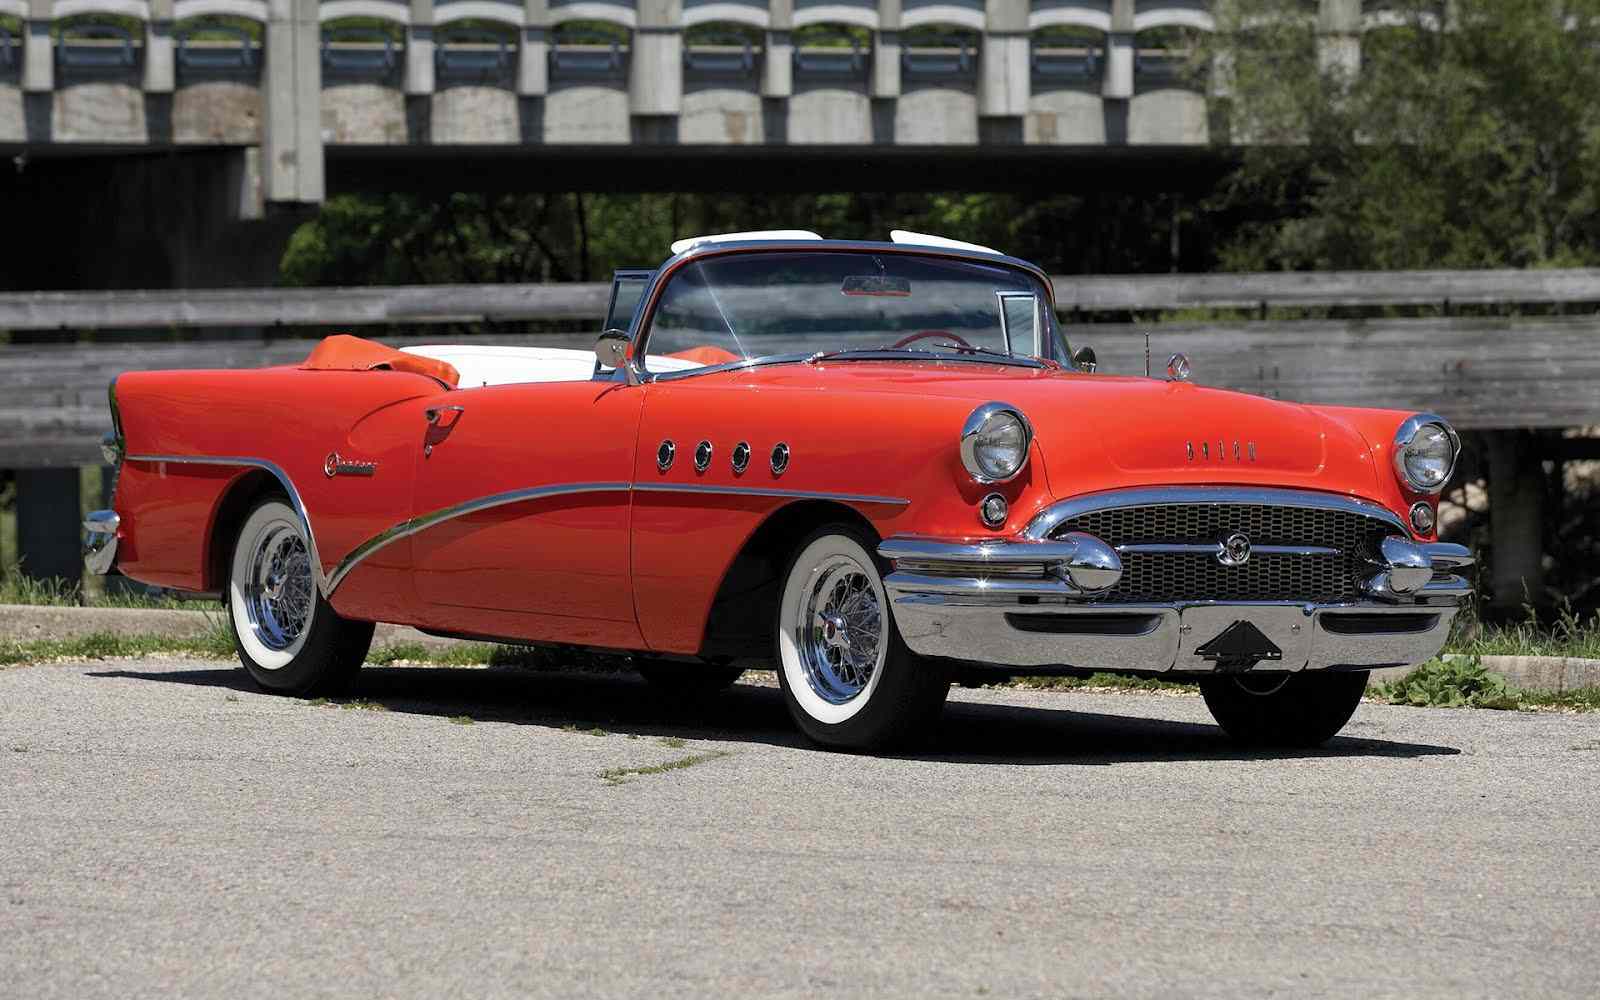 Free Download Car Pics For Mobile - 1955 Buick Century Convertible , HD Wallpaper & Backgrounds